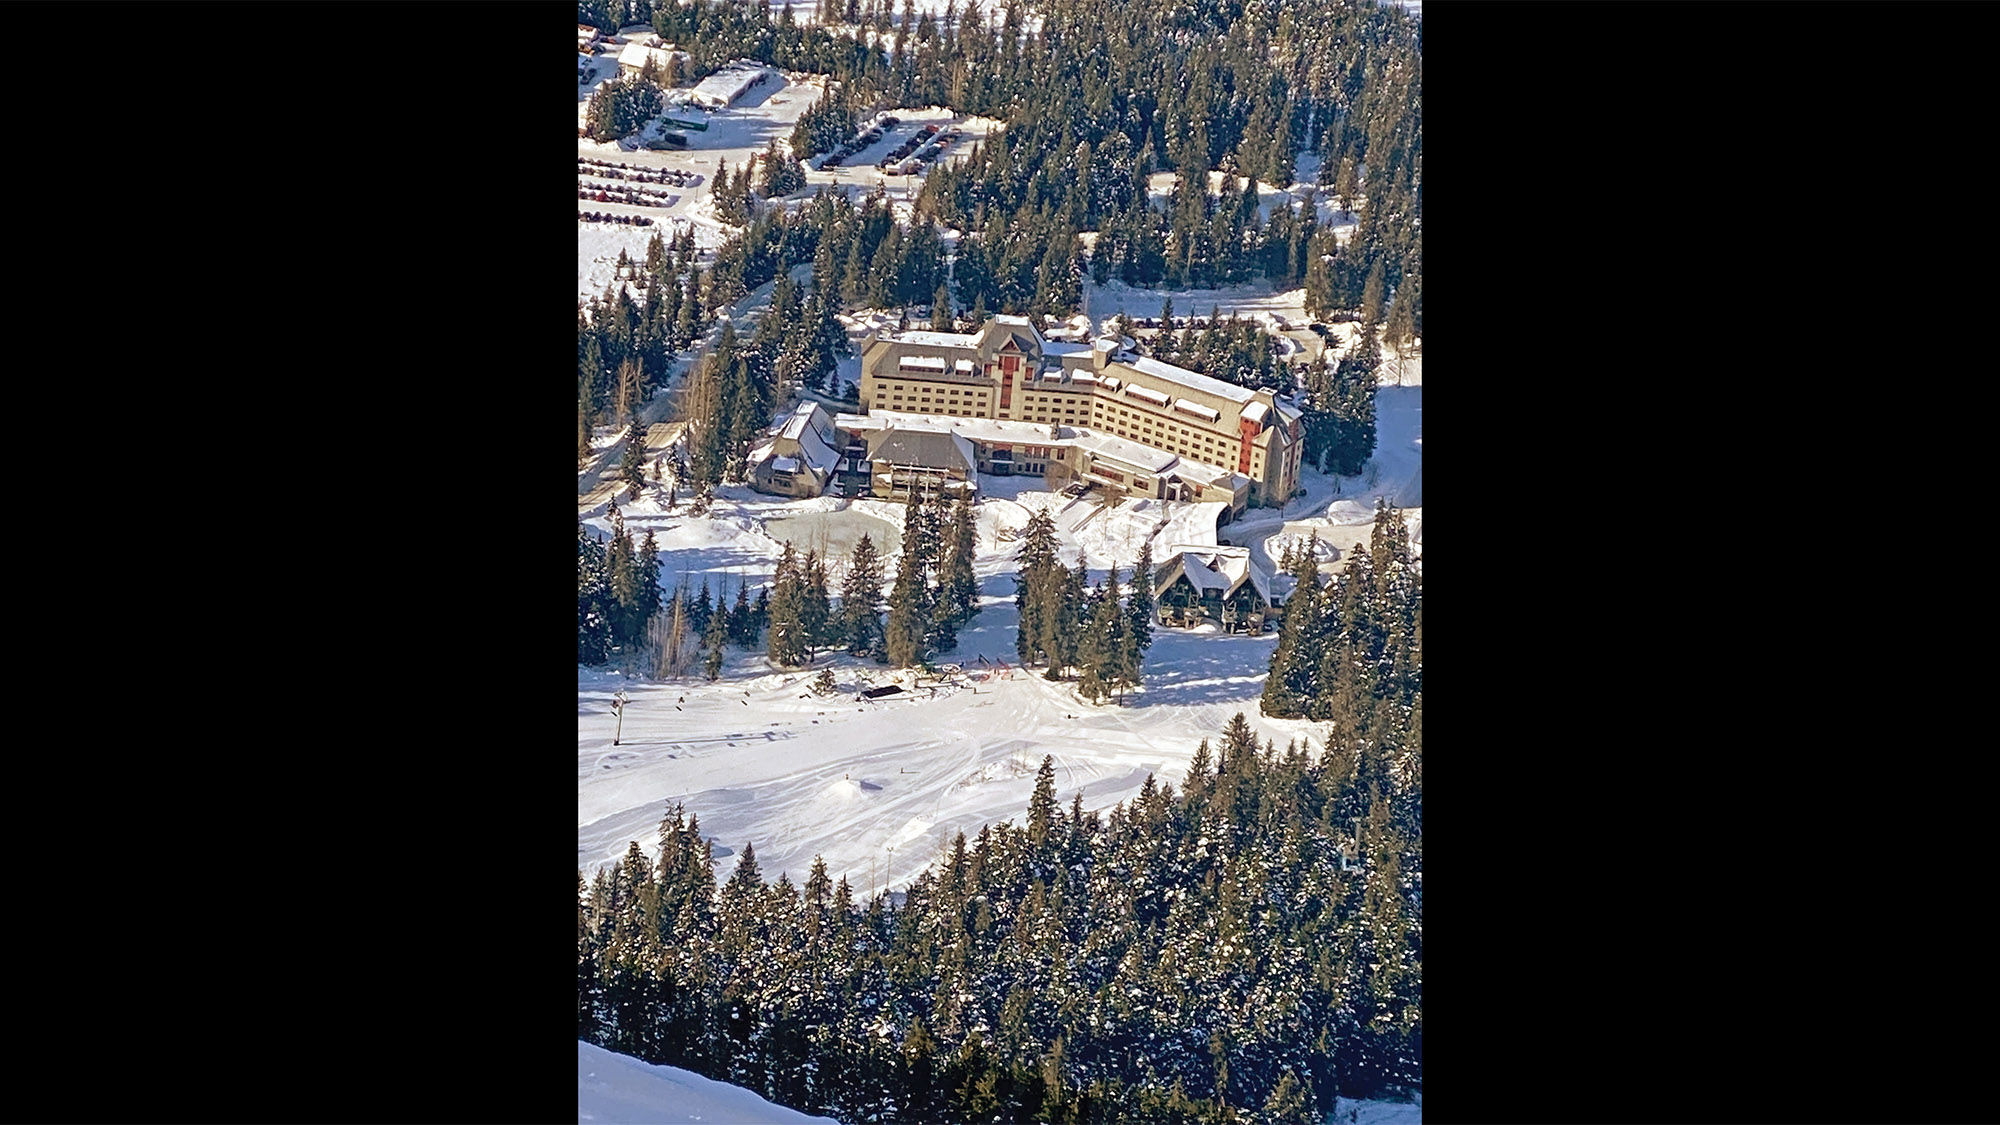 The Alyeska lodge, as seen from atop the ski mountain.